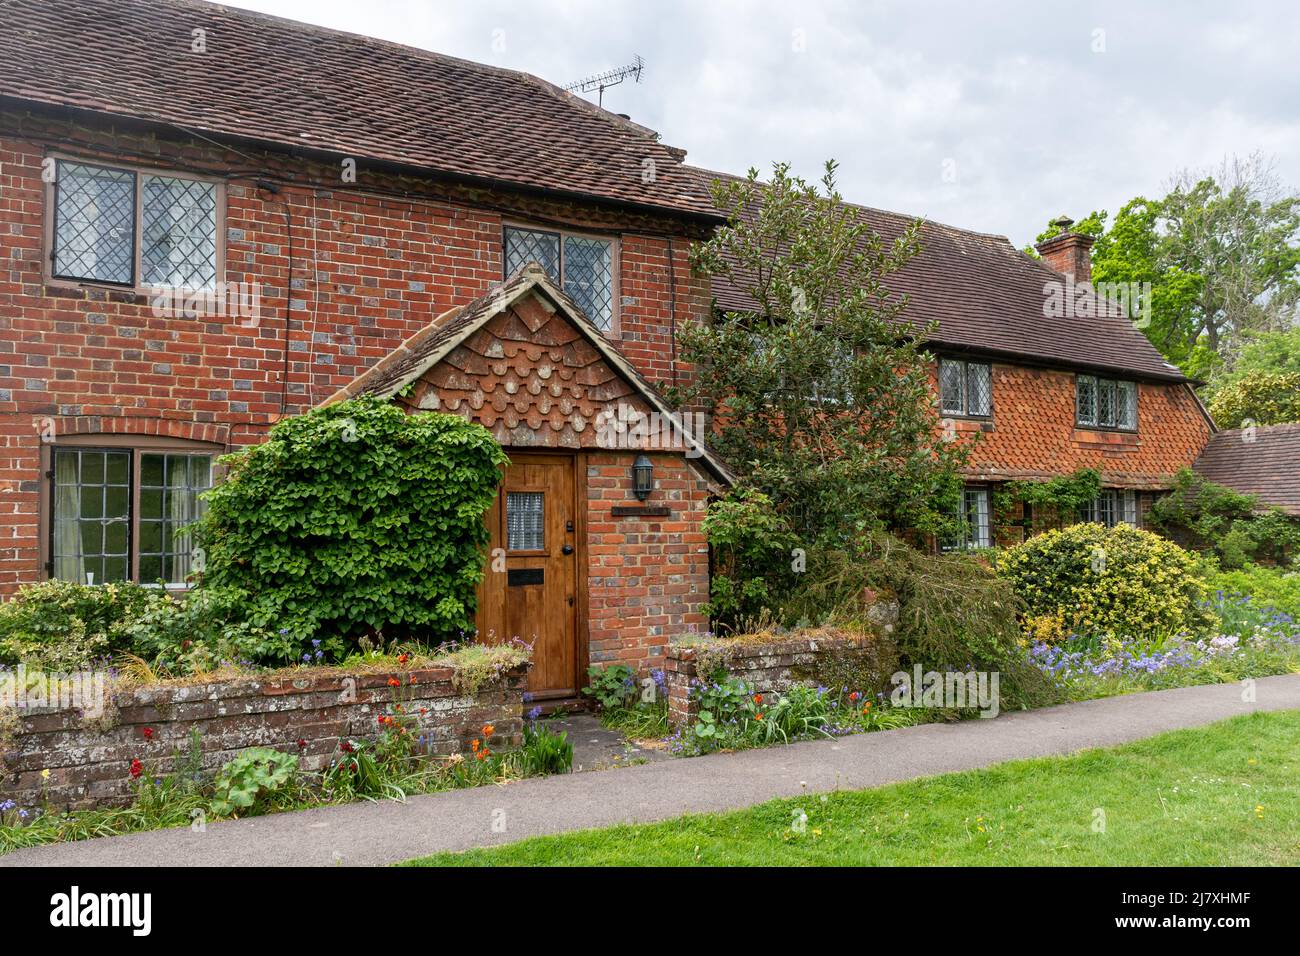 Attractive cottages and gardens in Dunsfold village, Surrey, England, UK Stock Photo